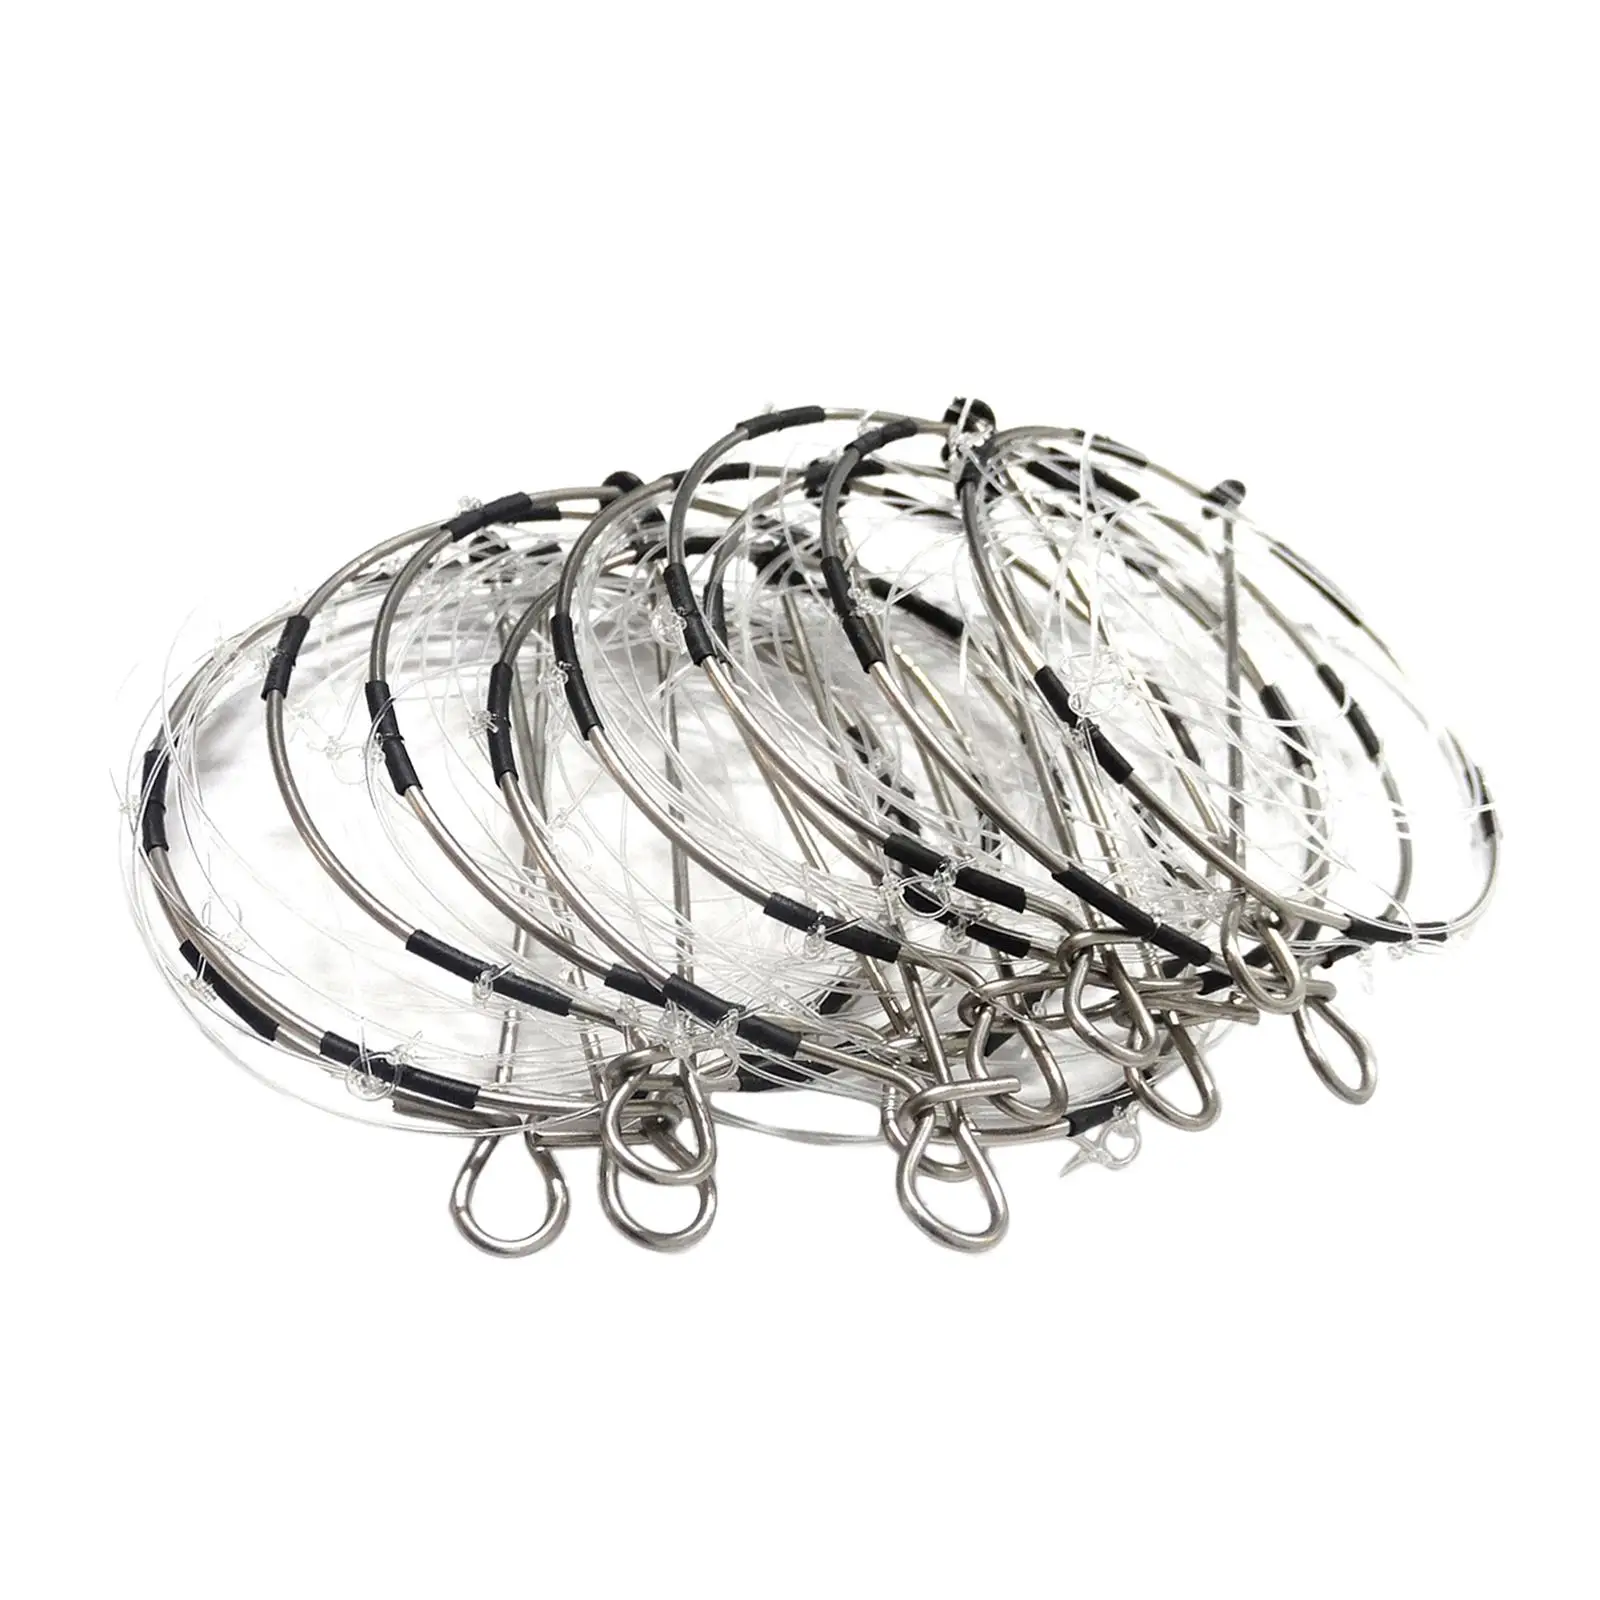 10 Pieces Crab Cast Trap Six Movable Buckles Repeated Use Cast Dip Cage Catch Crabs Tool for Crab Prawn Crawfish shrimp Crawdad